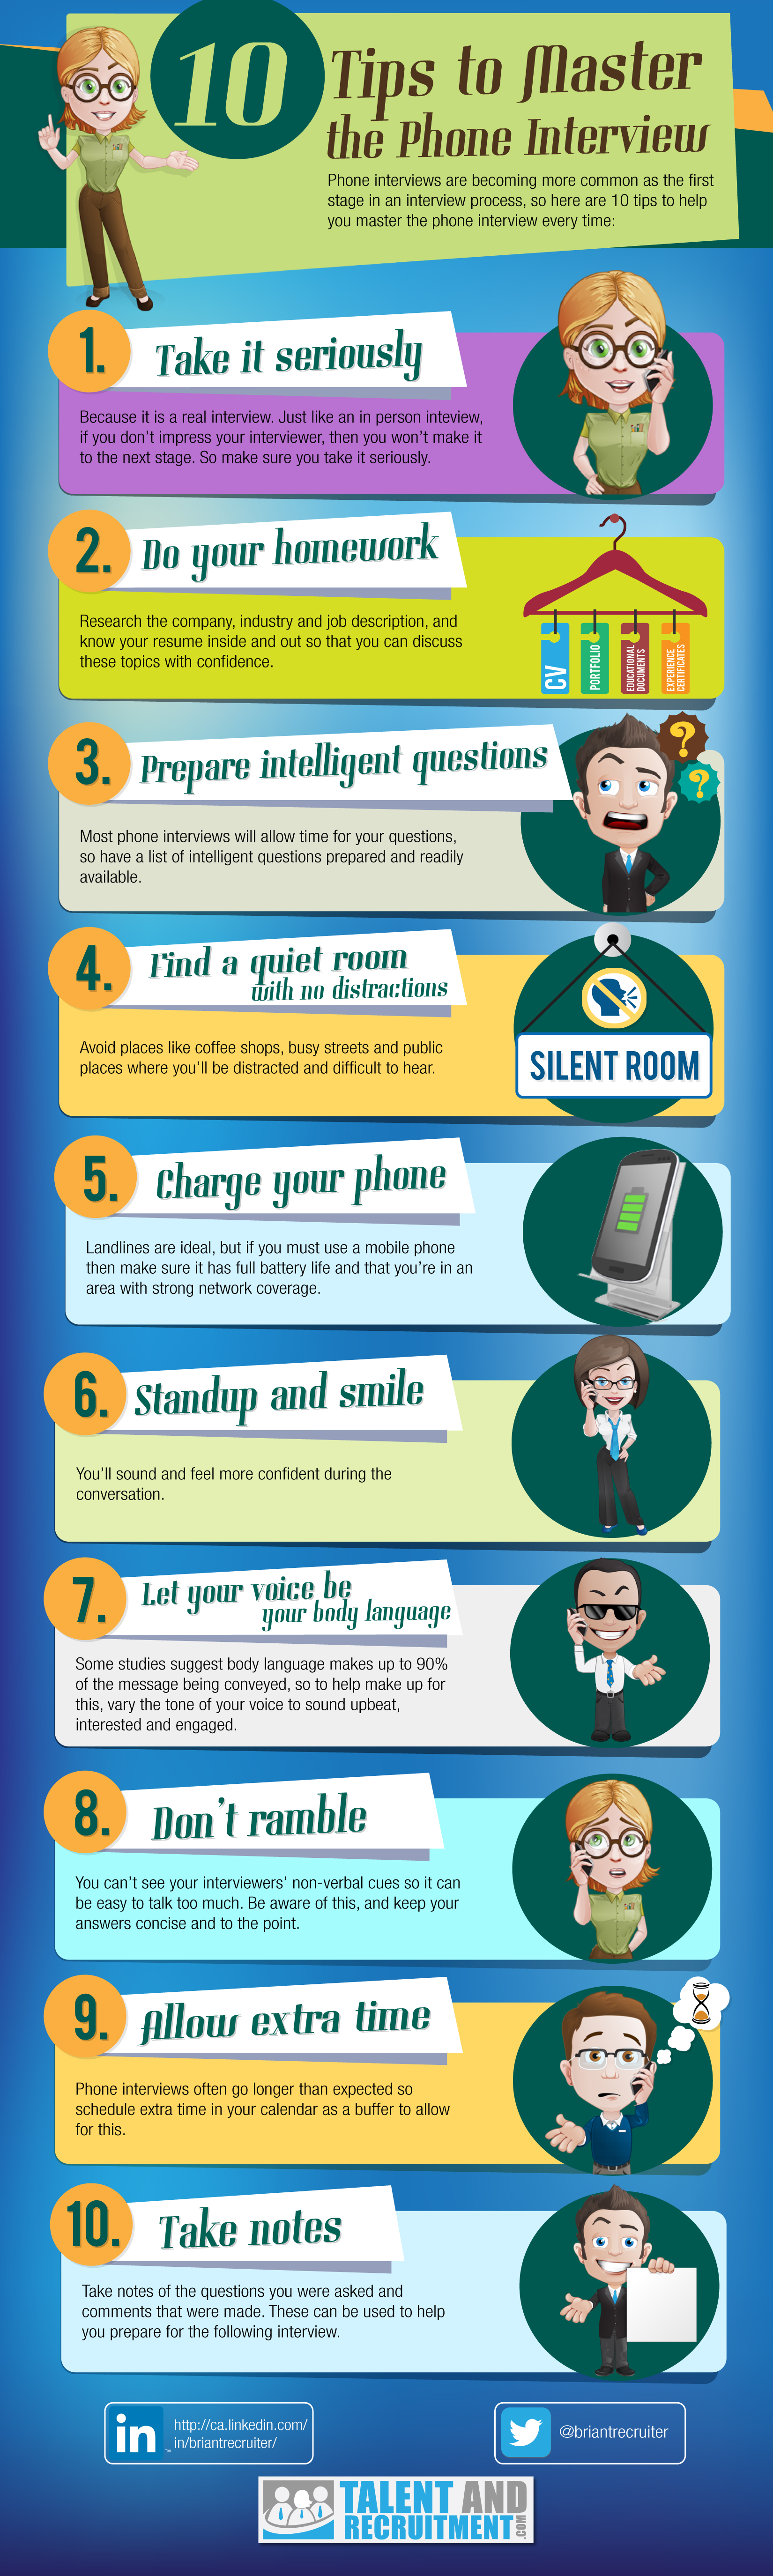 10-Tips-Master-Phone-Interview1